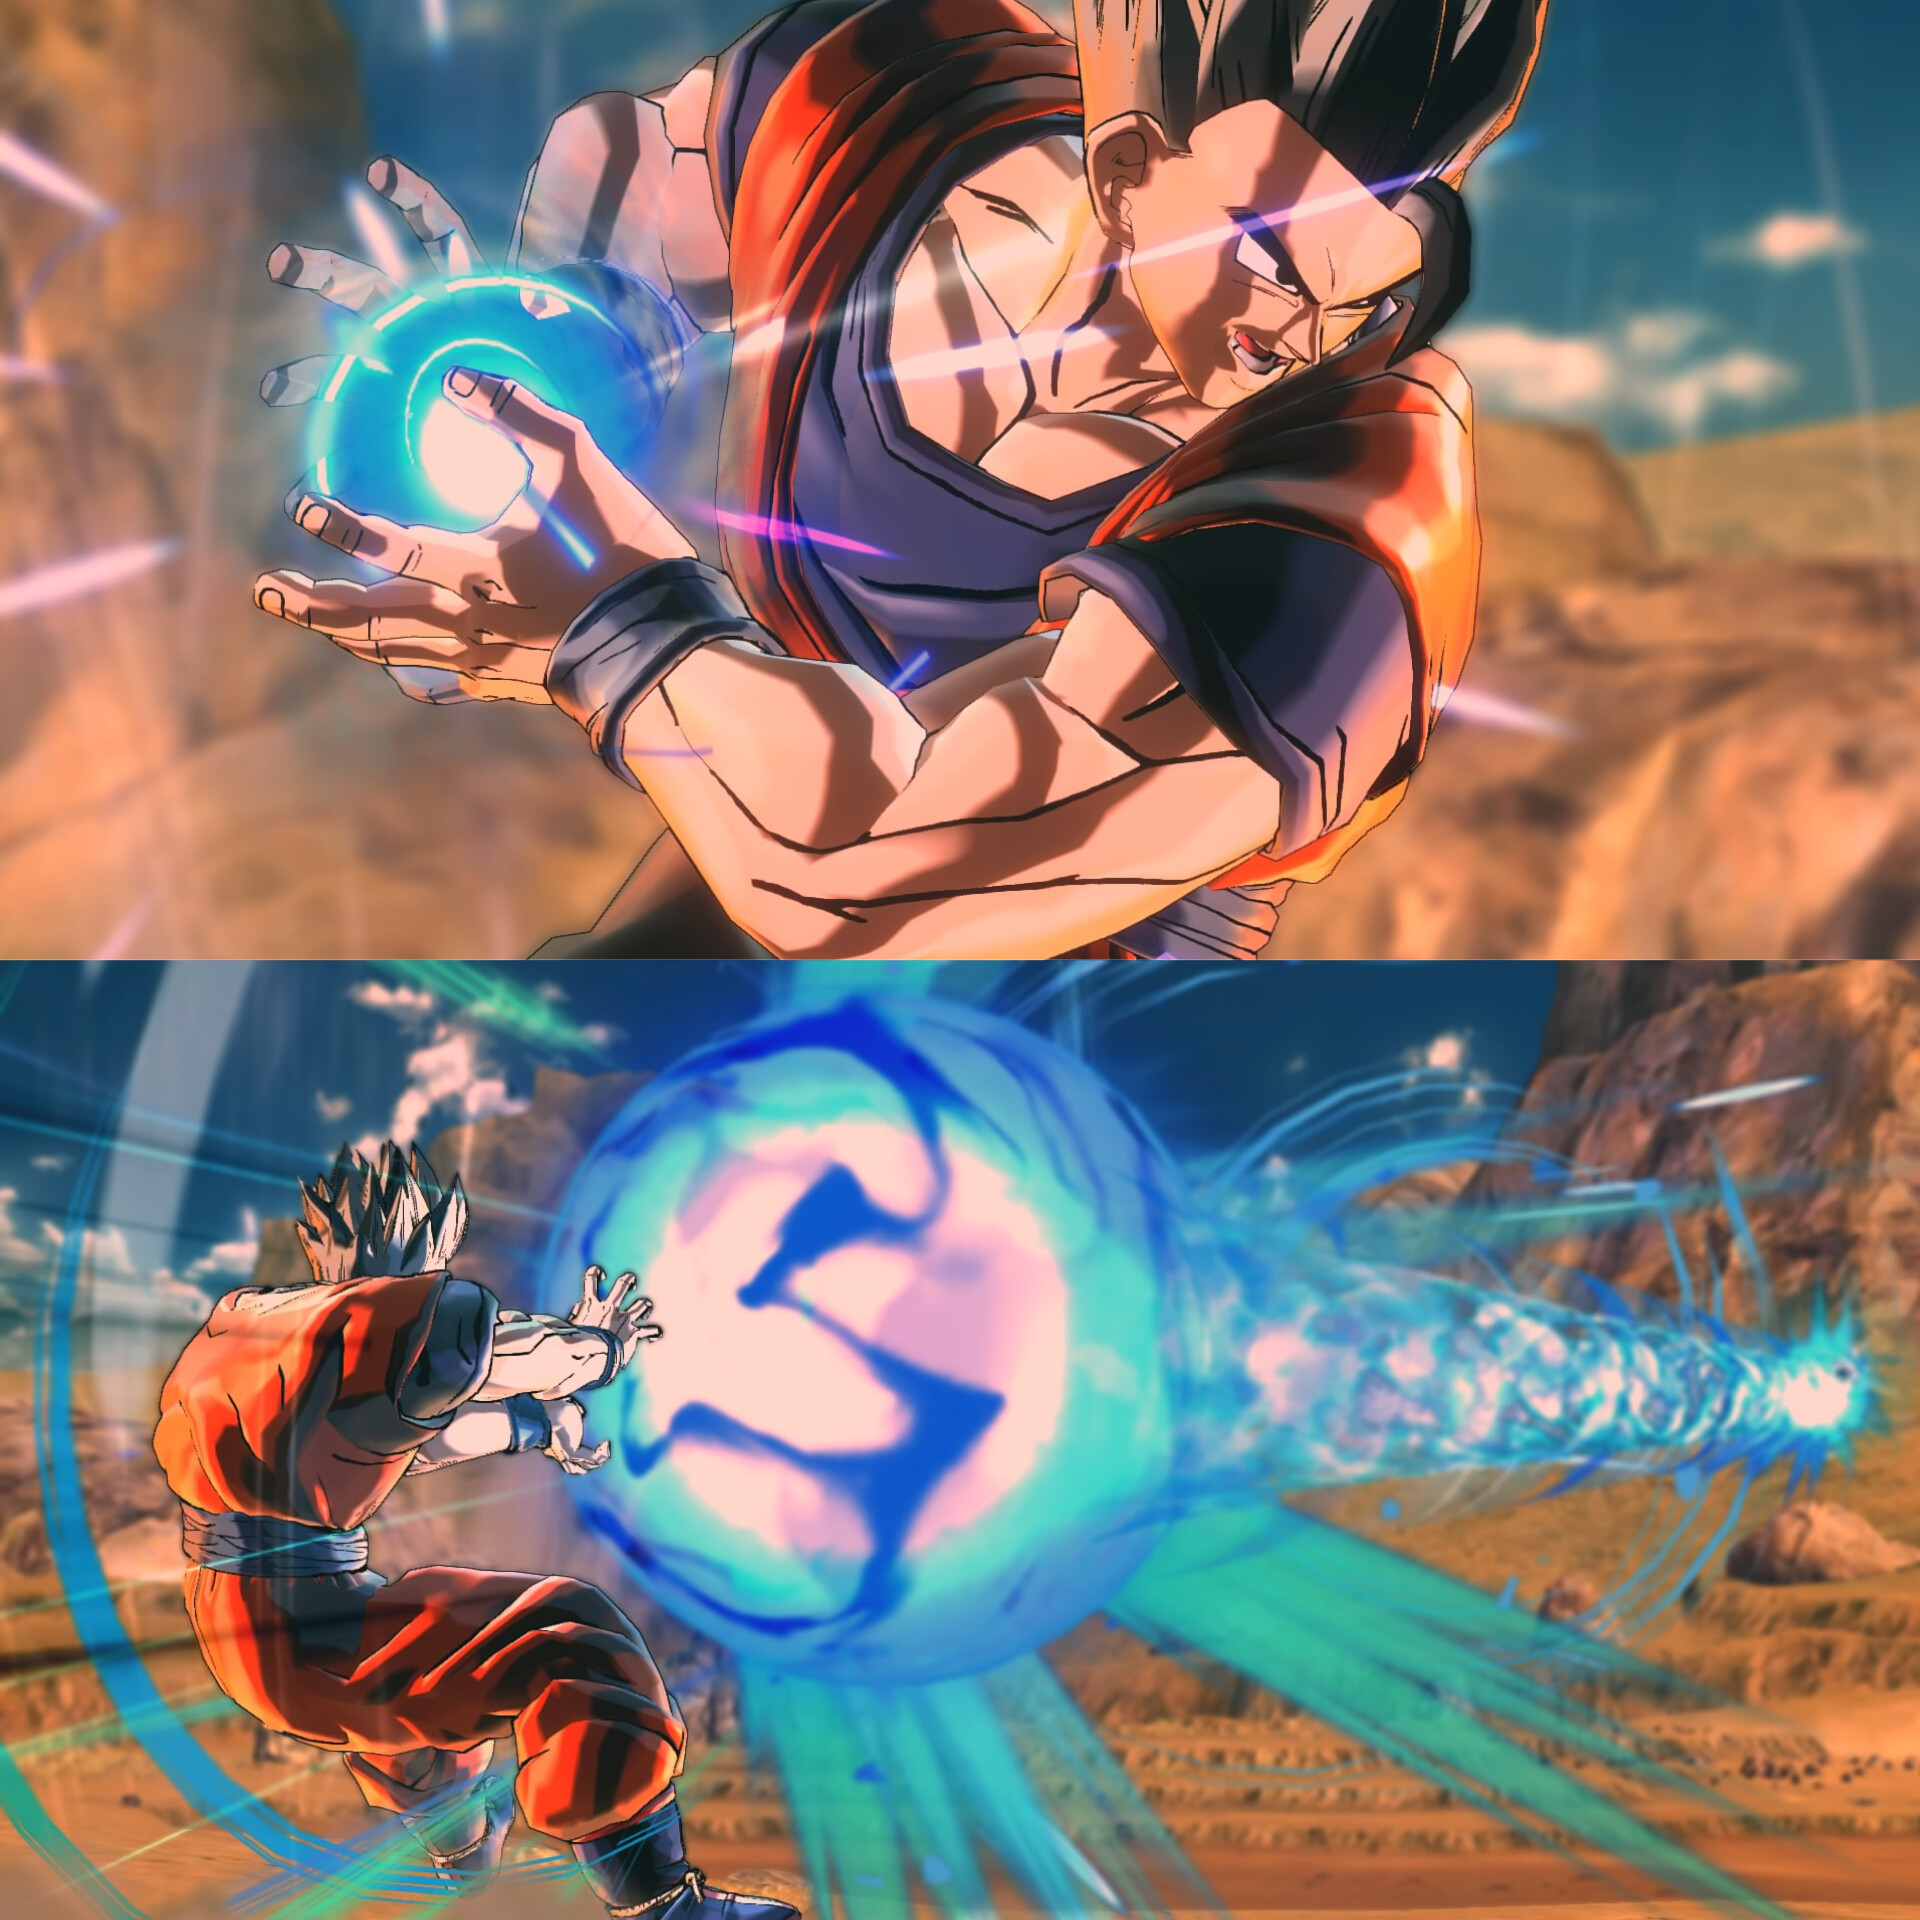 What's The Difference Between The Kamehameha In Dragon Ball